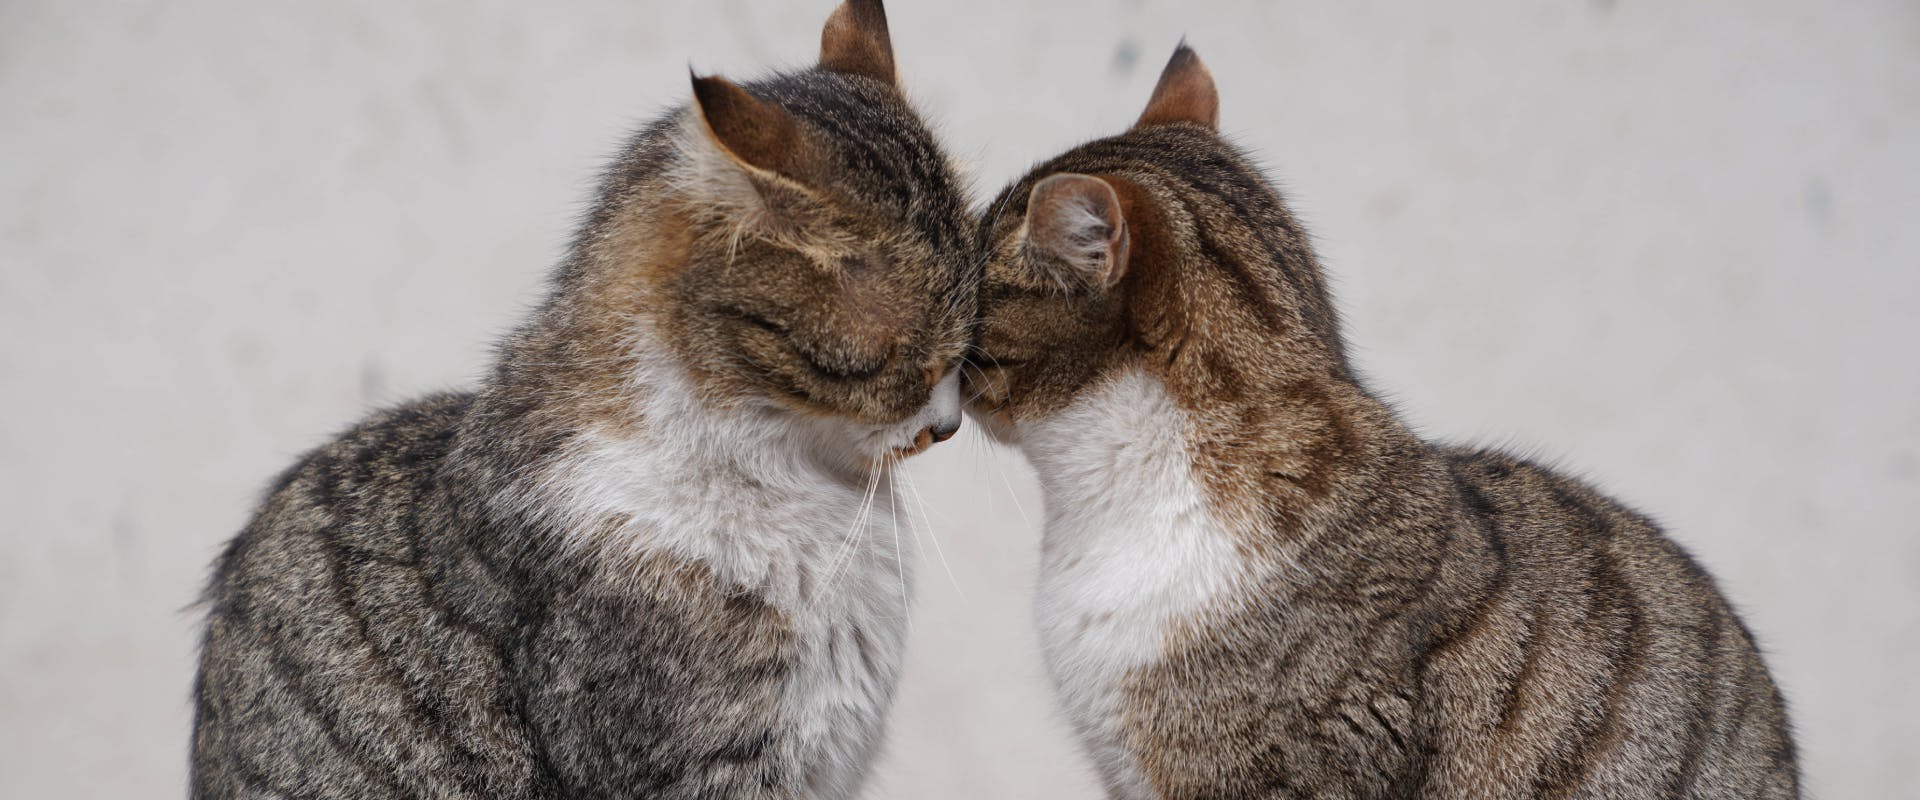 two tabby cats head bumping and exchanging scents